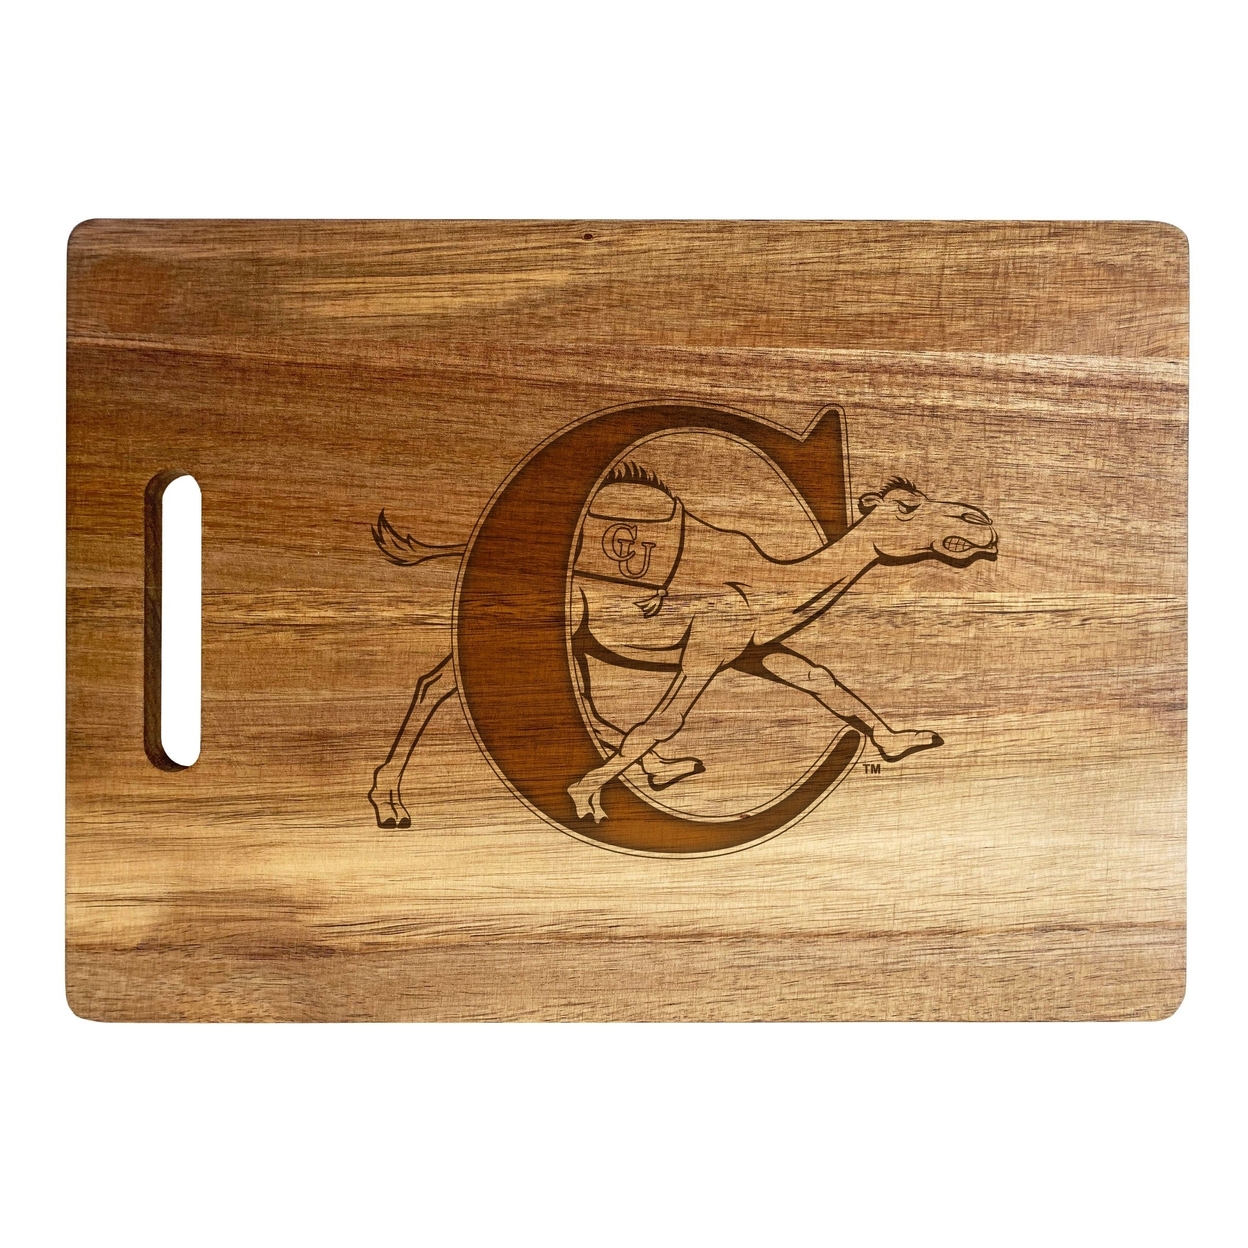 Campbell University Fighting Camels Engraved Wooden Cutting Board 10 X 14 Acacia Wood - Large Engraving